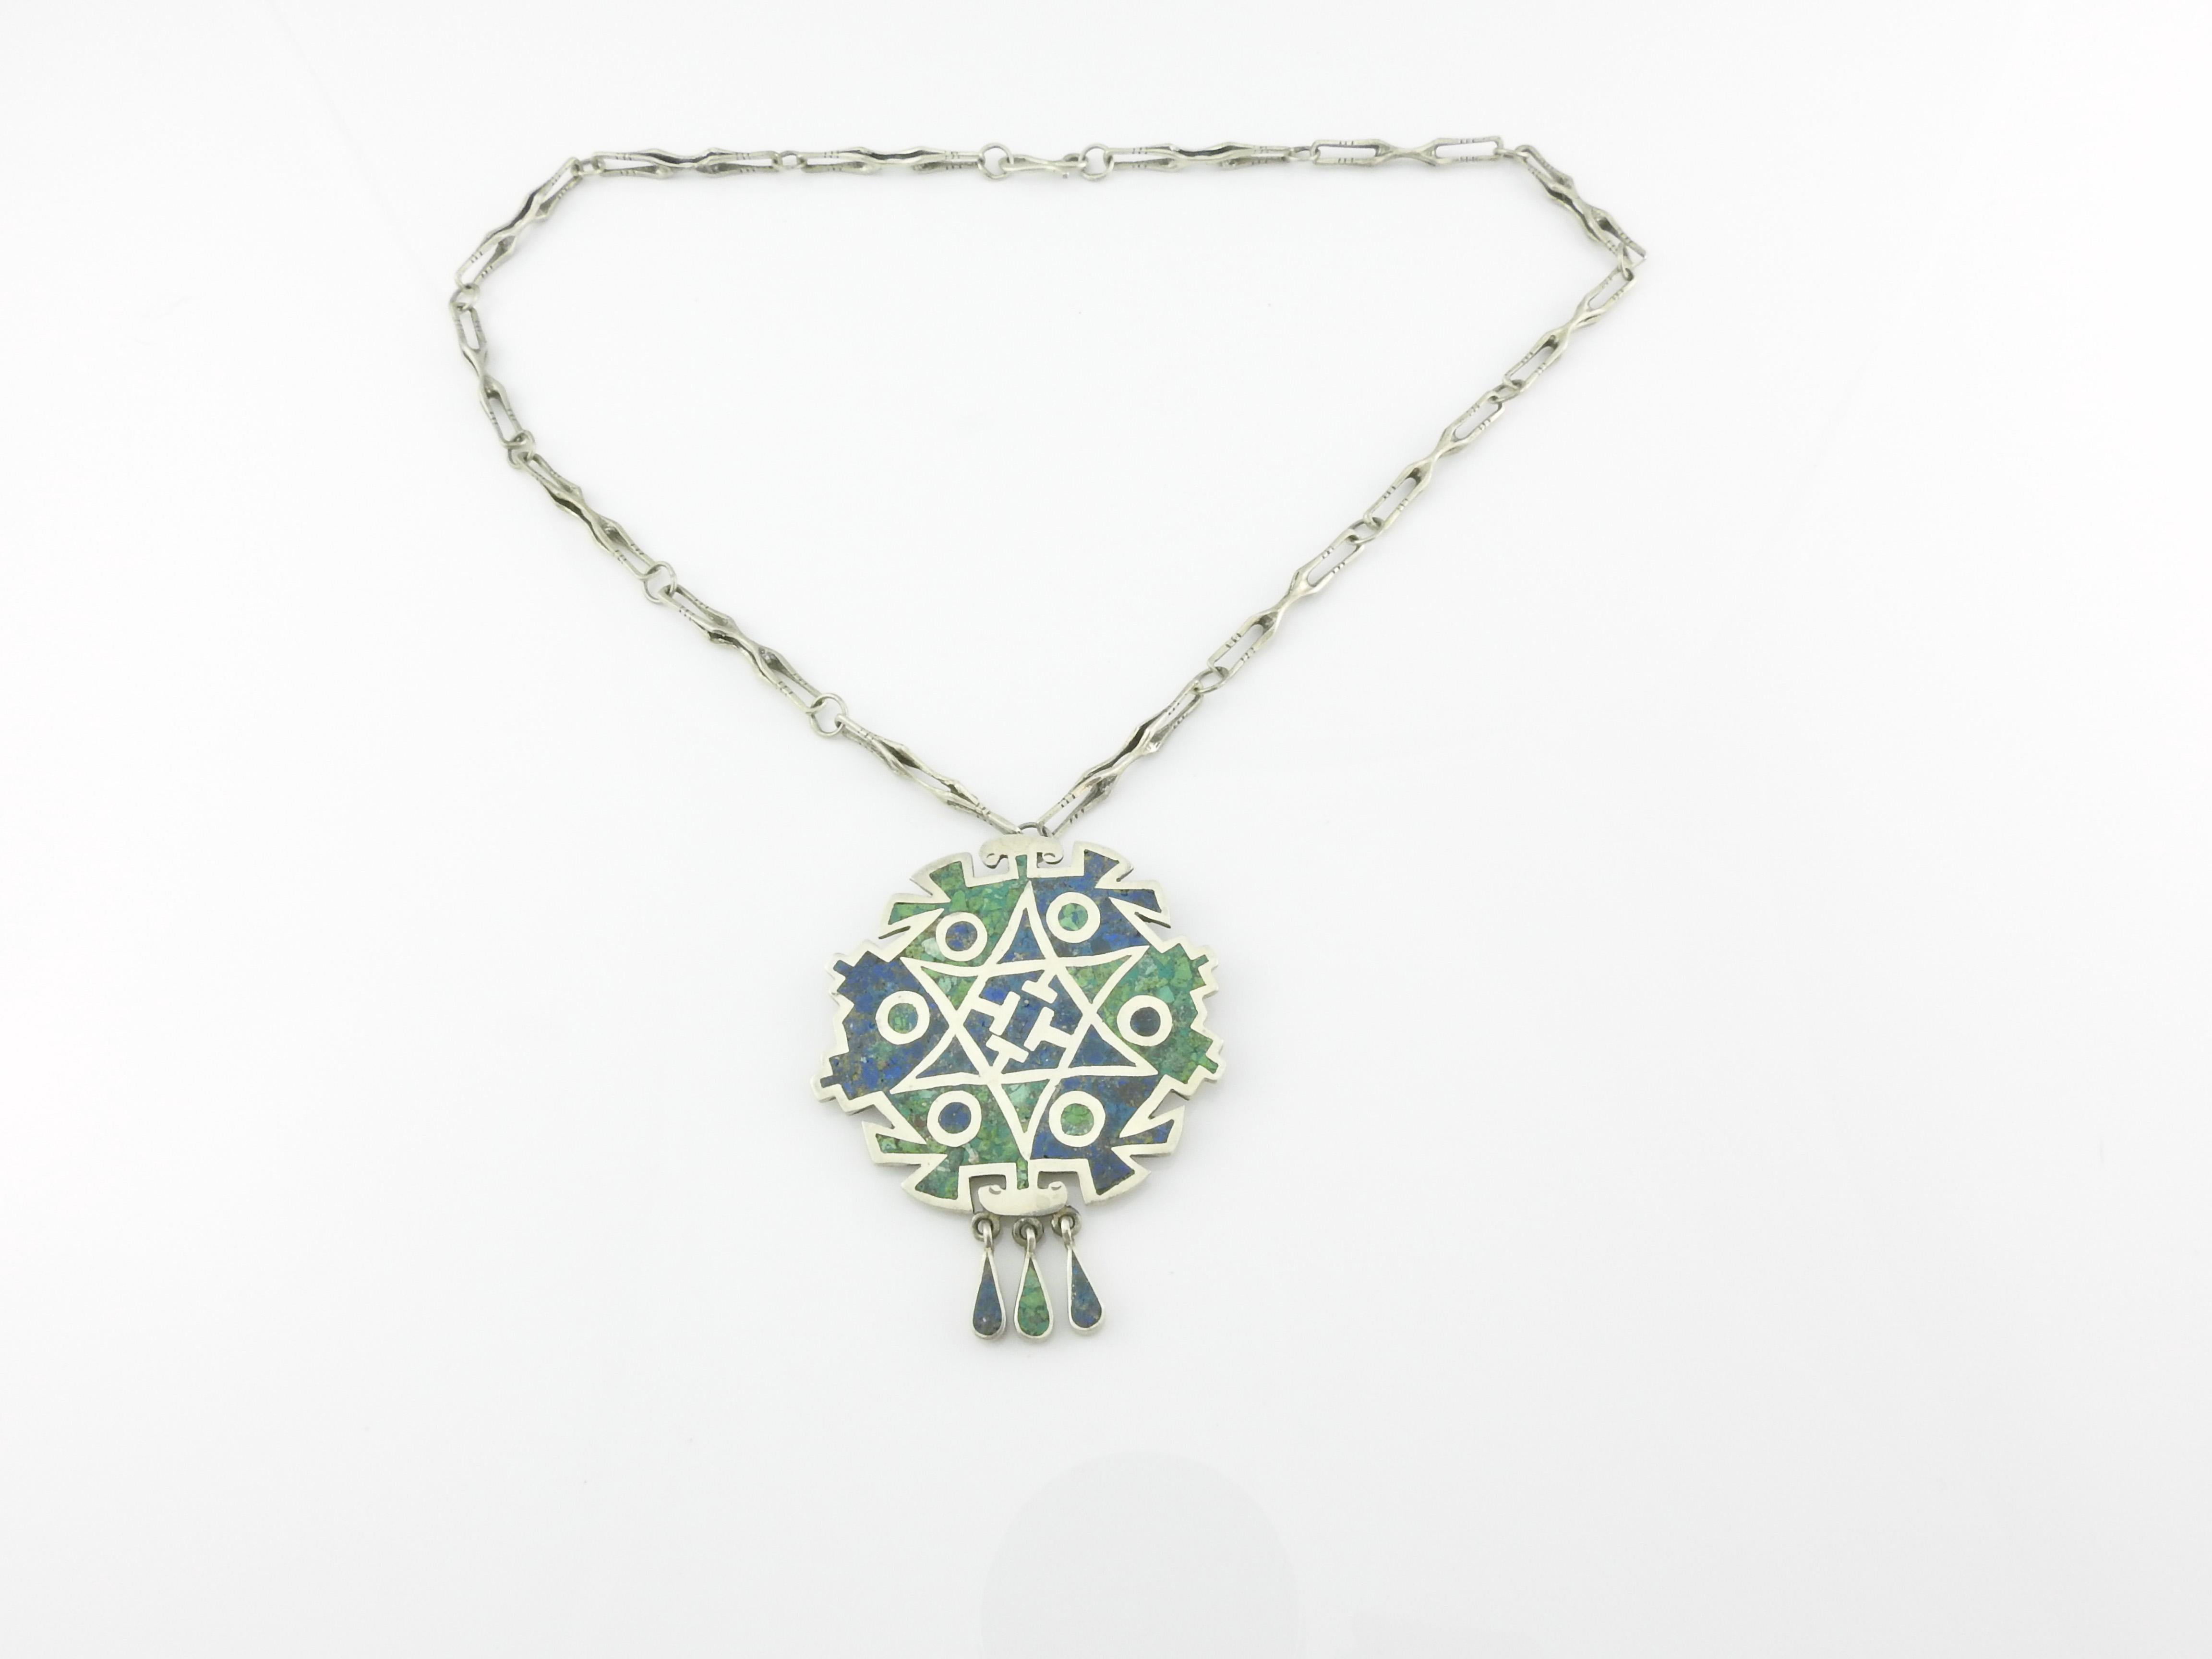 Taxco Mexico Jacopo Bros. Arte en Plata sterling silver Star of David inlay pendant/pin necklace.

Crushed turquoise and blue lapis lazuli.

Marked: ARTE EN PLATA, Taxco Mexico 925, MMA, conjoined JP, 29.

Pendant/pin measures: 2 5/16